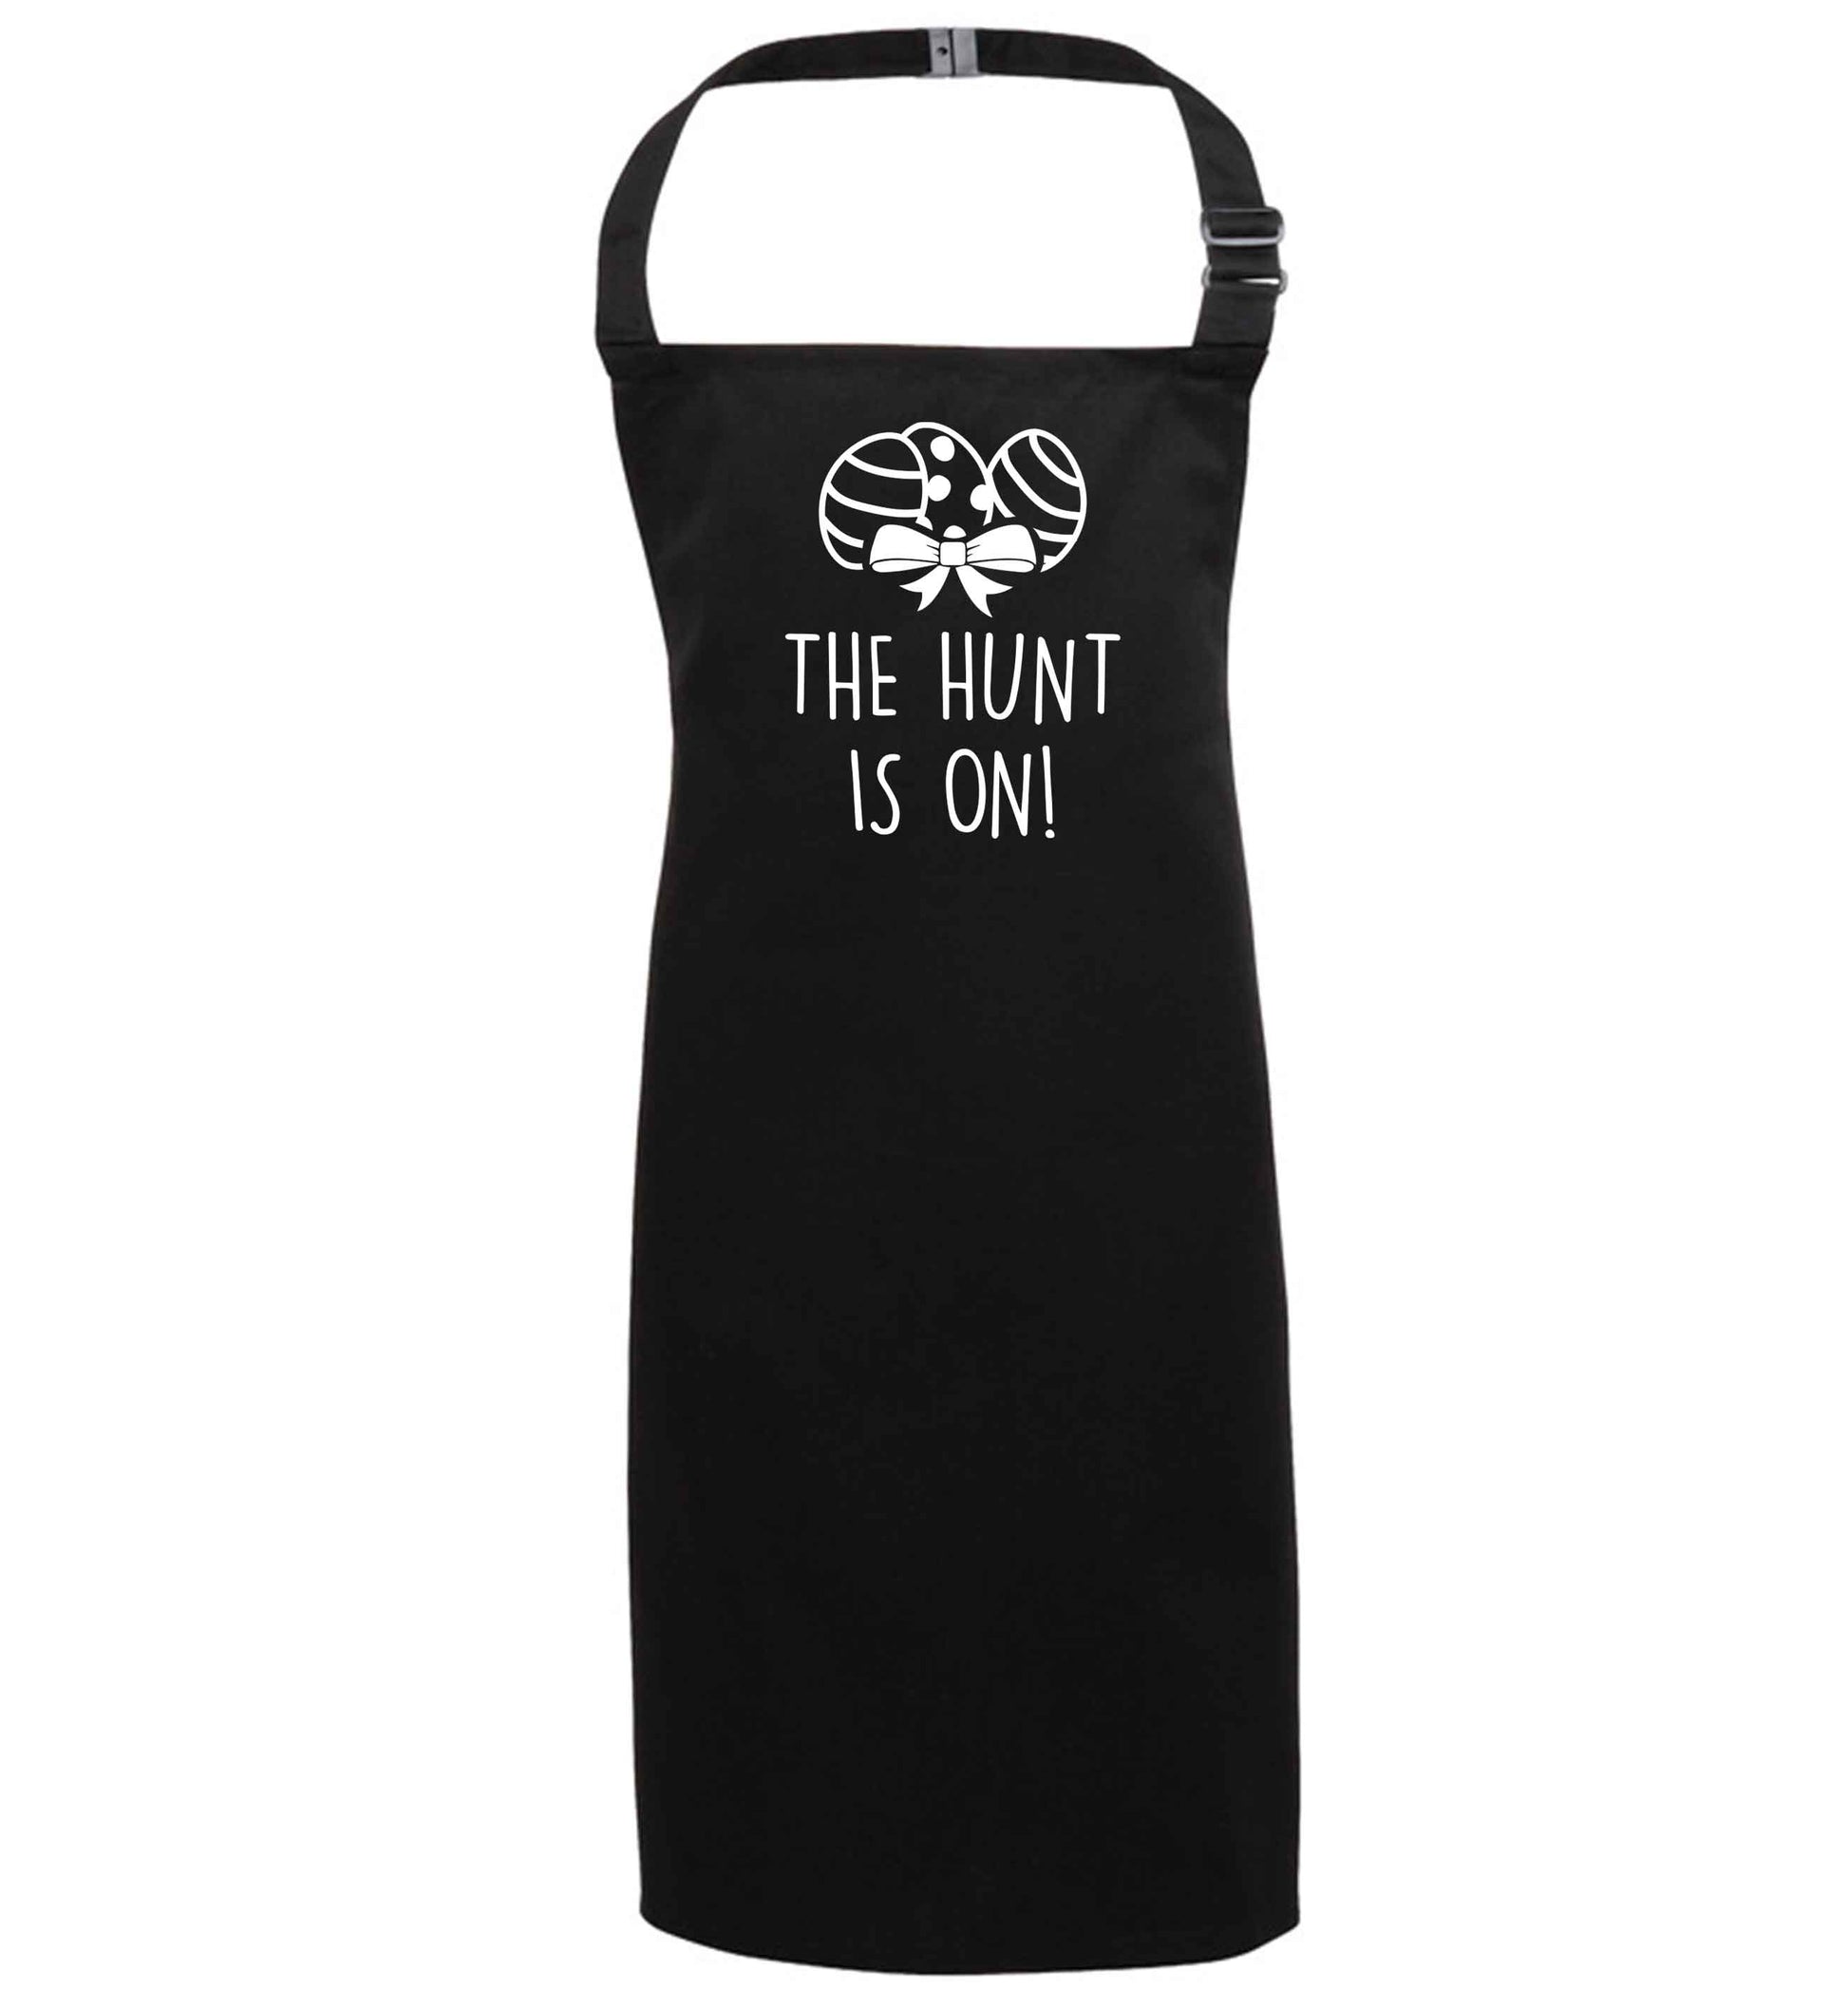 The hunt is on black apron 7-10 years